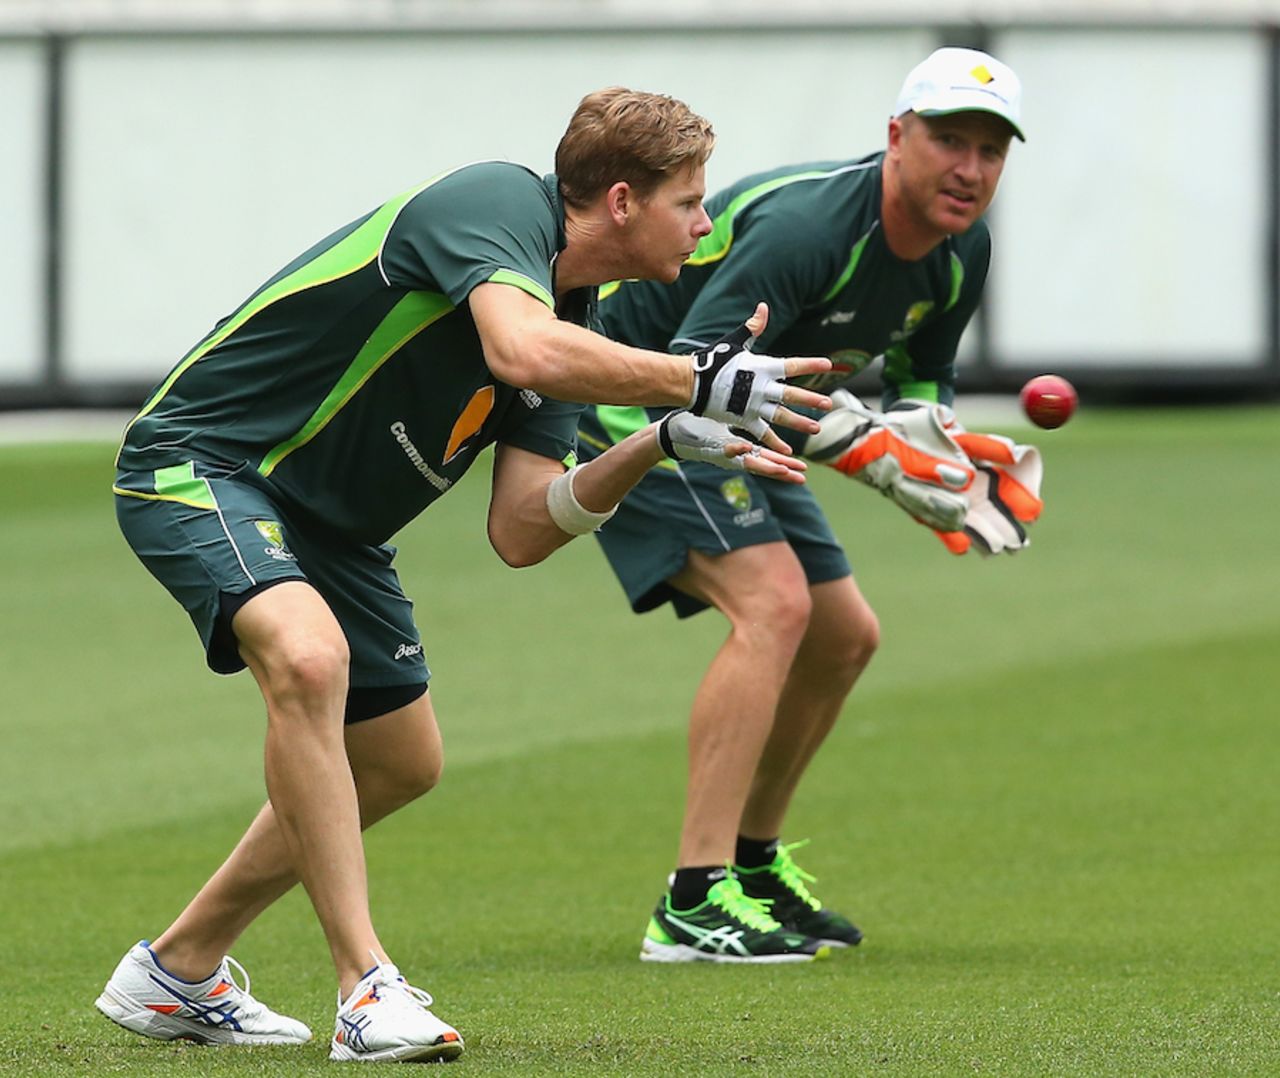 Brad Haddin and Steve Smith during a catching drill, Melbourne, December 23, 2014